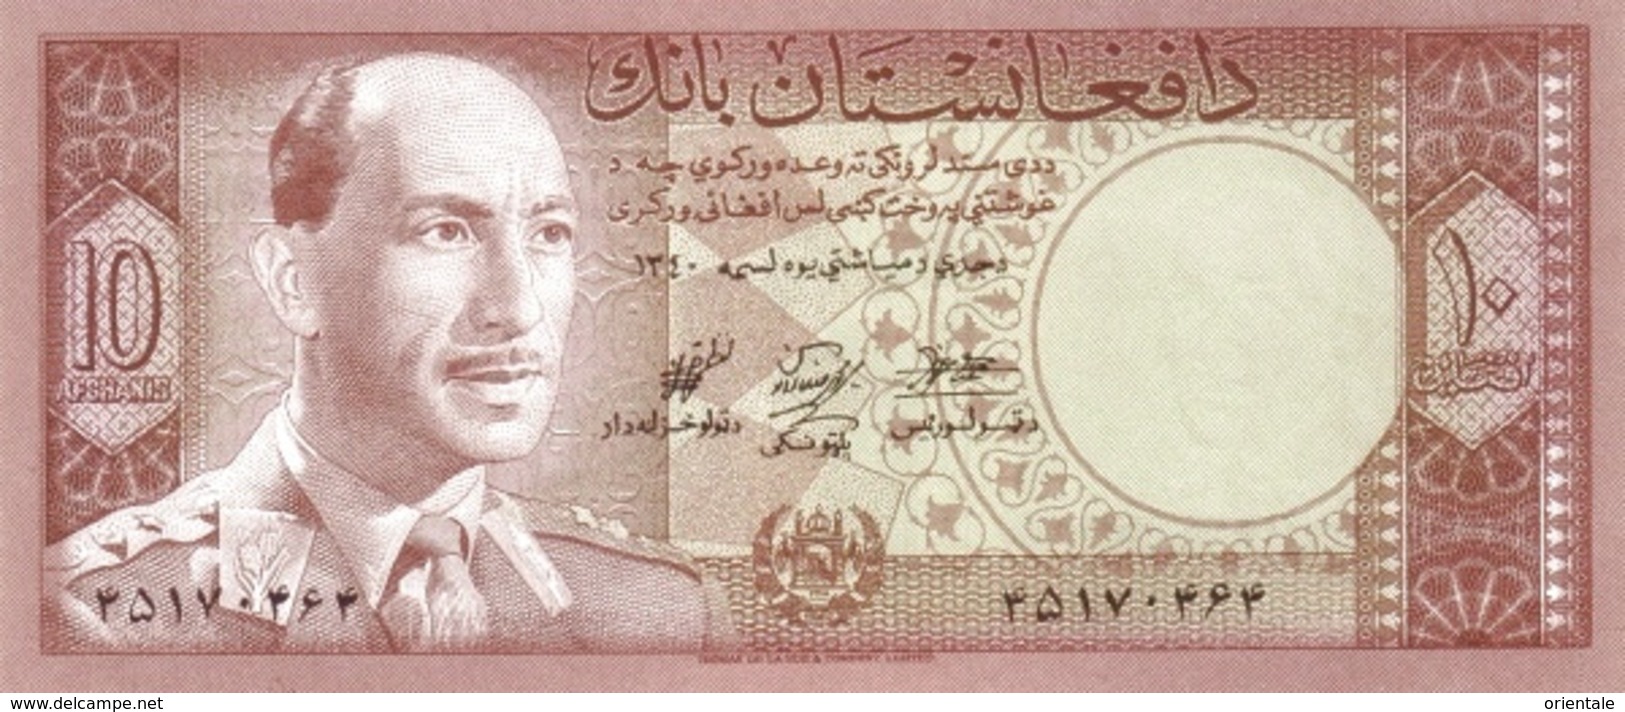 AFGHANISTAN P. 37a 10 A 1961 UNC - Afghanistan